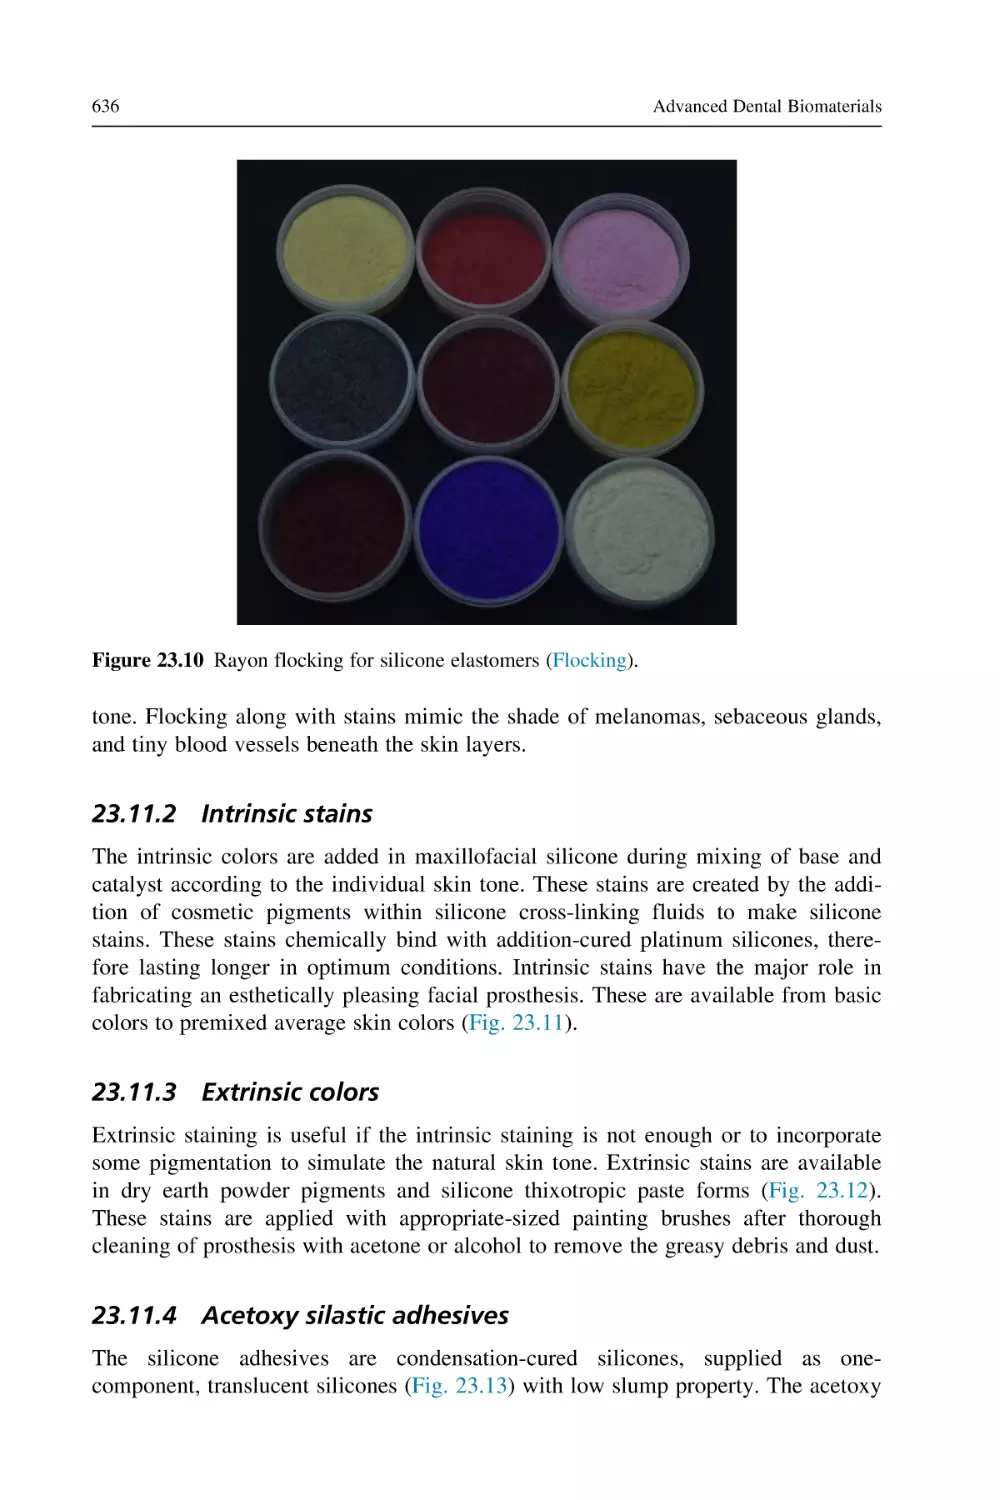 23.11.2 Intrinsic stains
23.11.3 Extrinsic colors
23.11.4 Acetoxy silastic adhesives